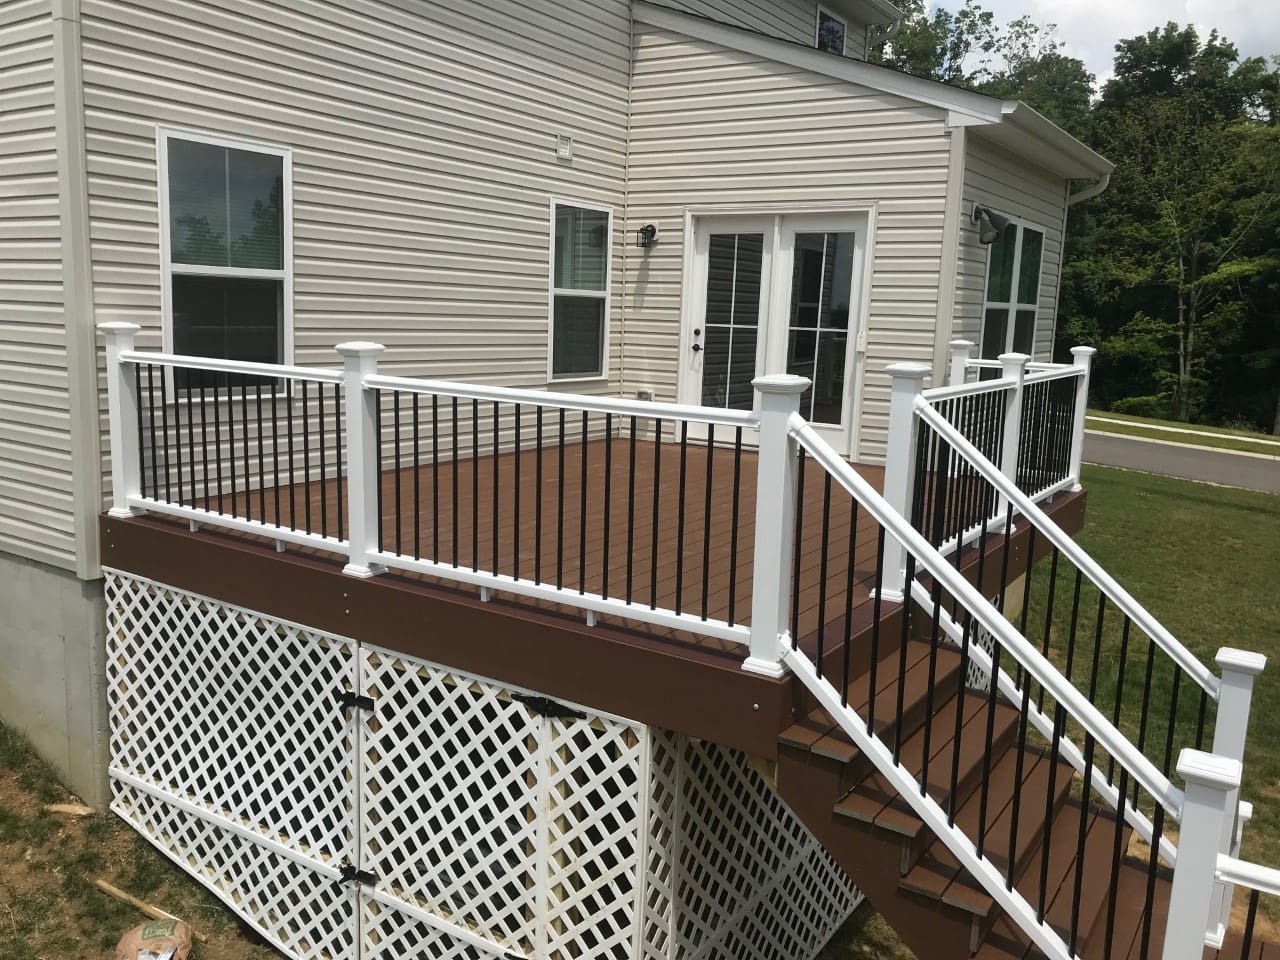 A deck with stairs and railing in the middle of it.